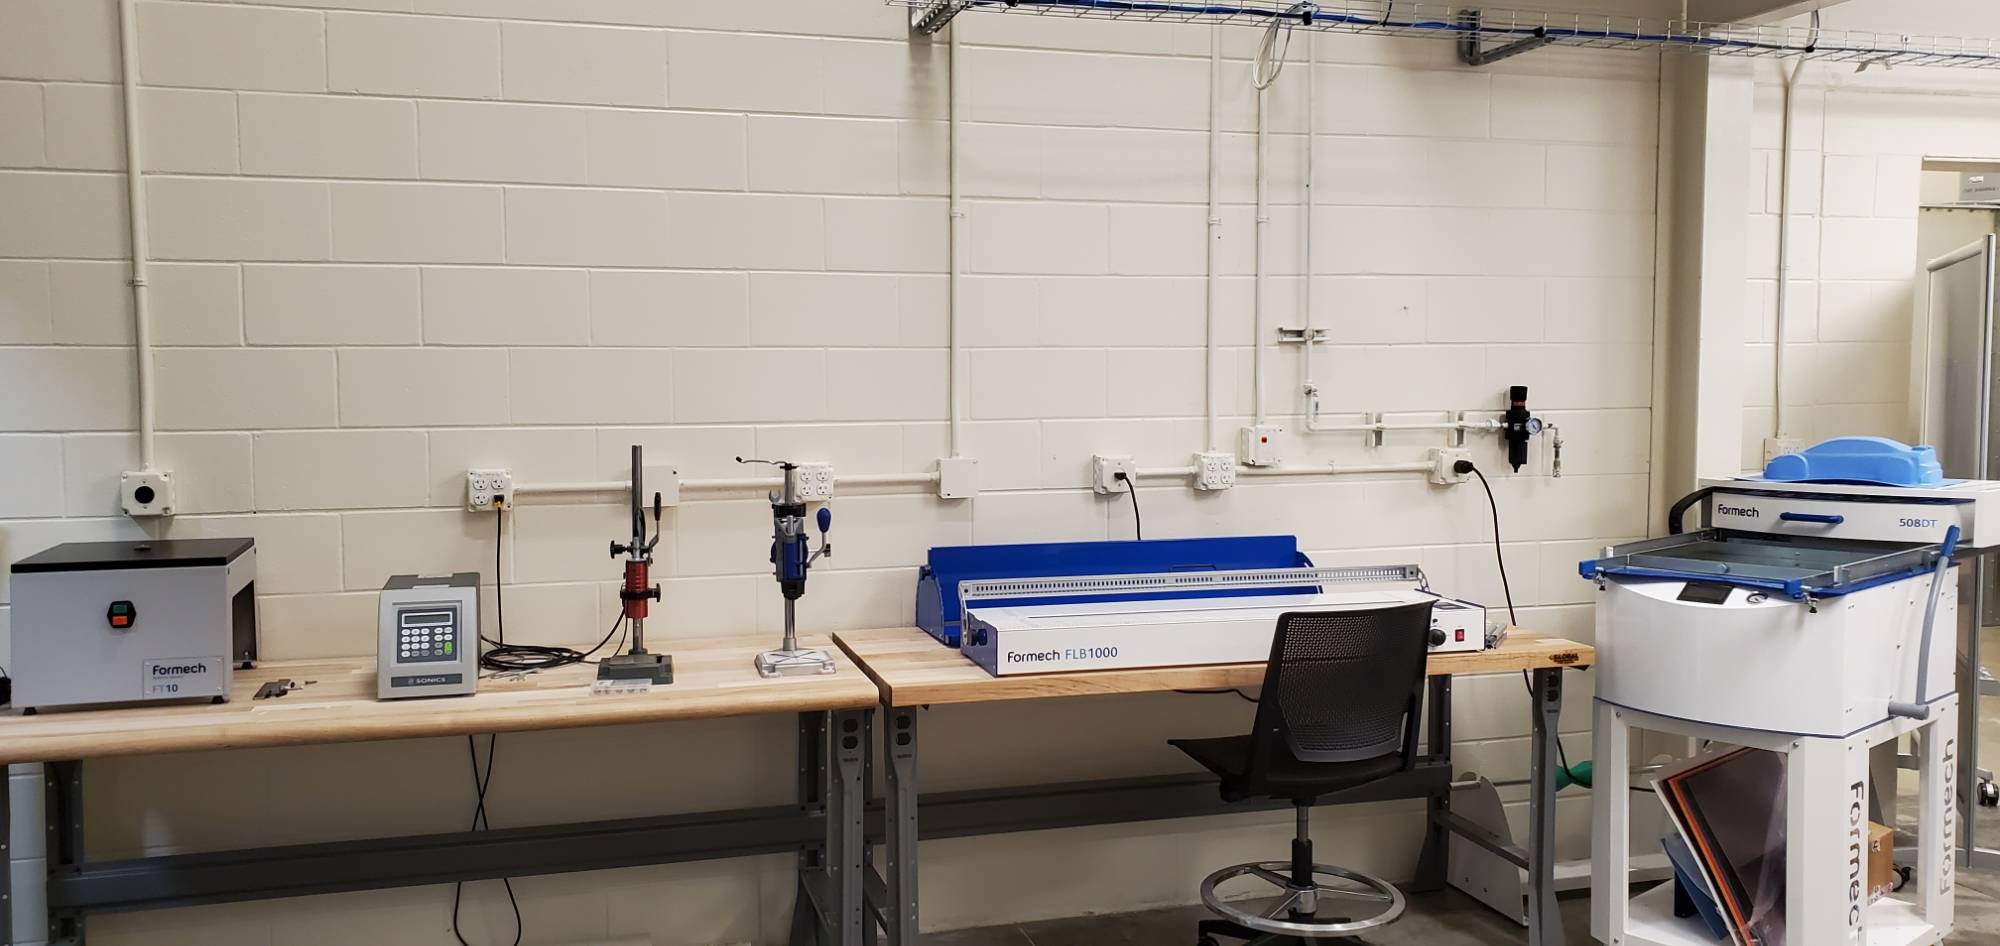 plastic forming station in the rapid prototyping lab